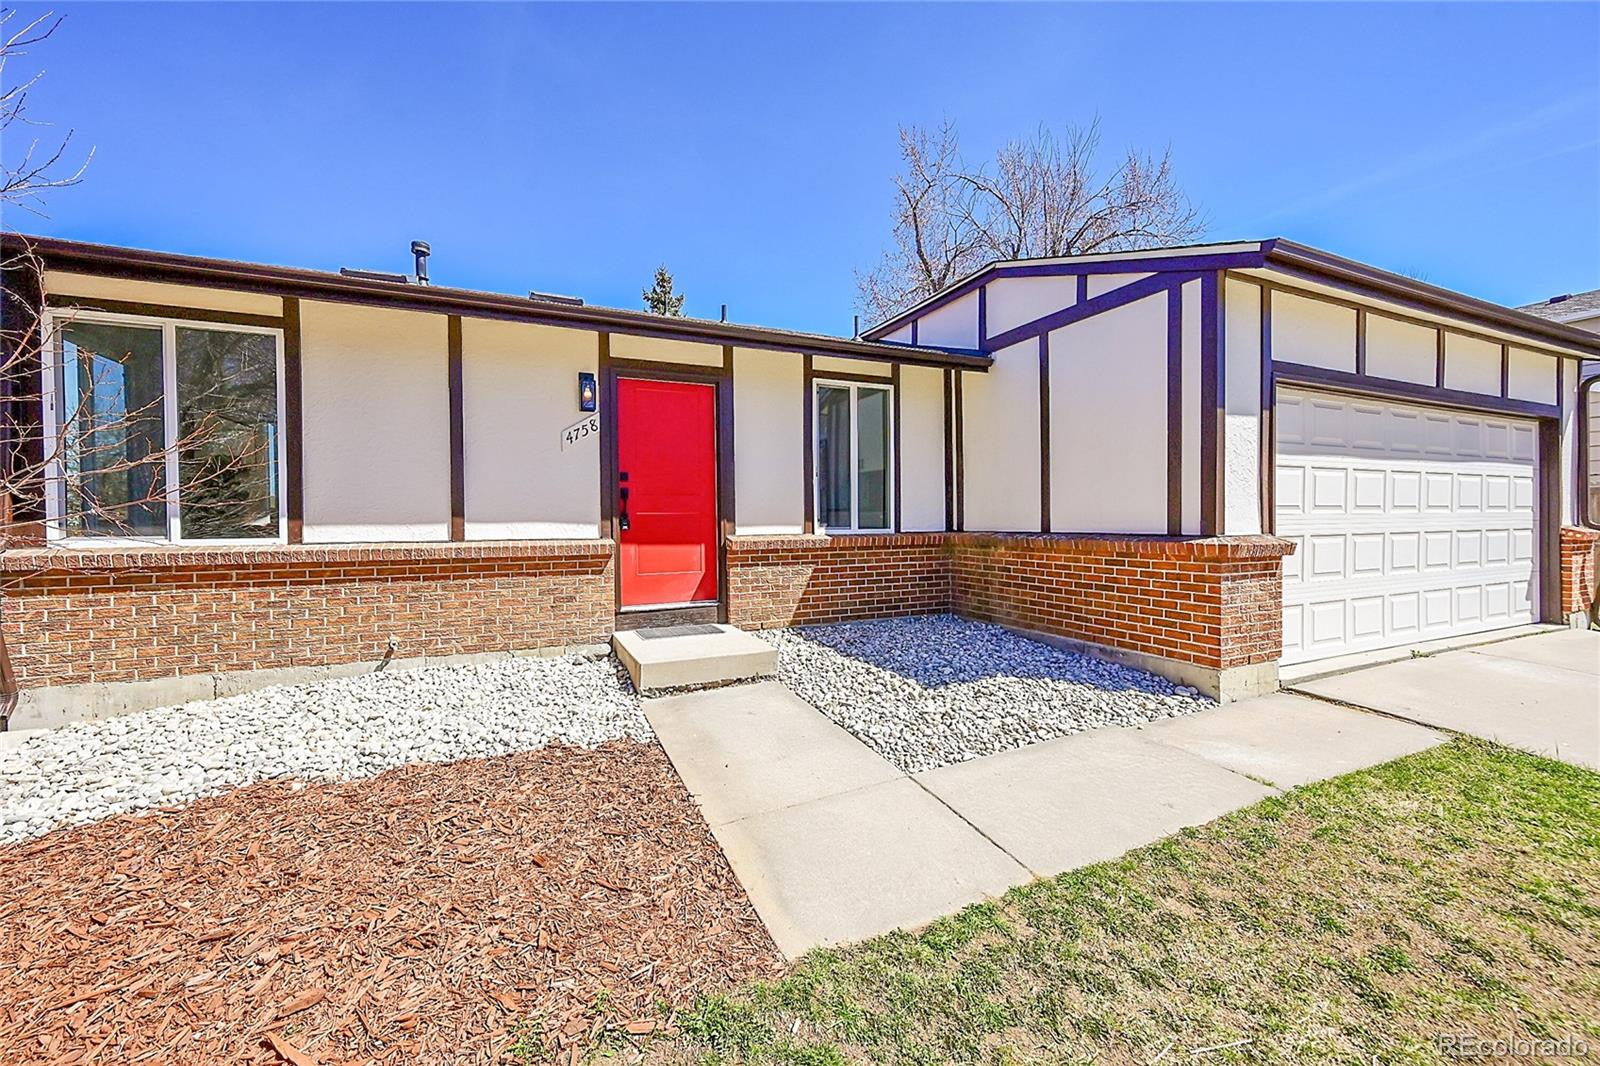 4758 s salida court, aurora sold home. Closed on 2024-04-29 for $481,500.